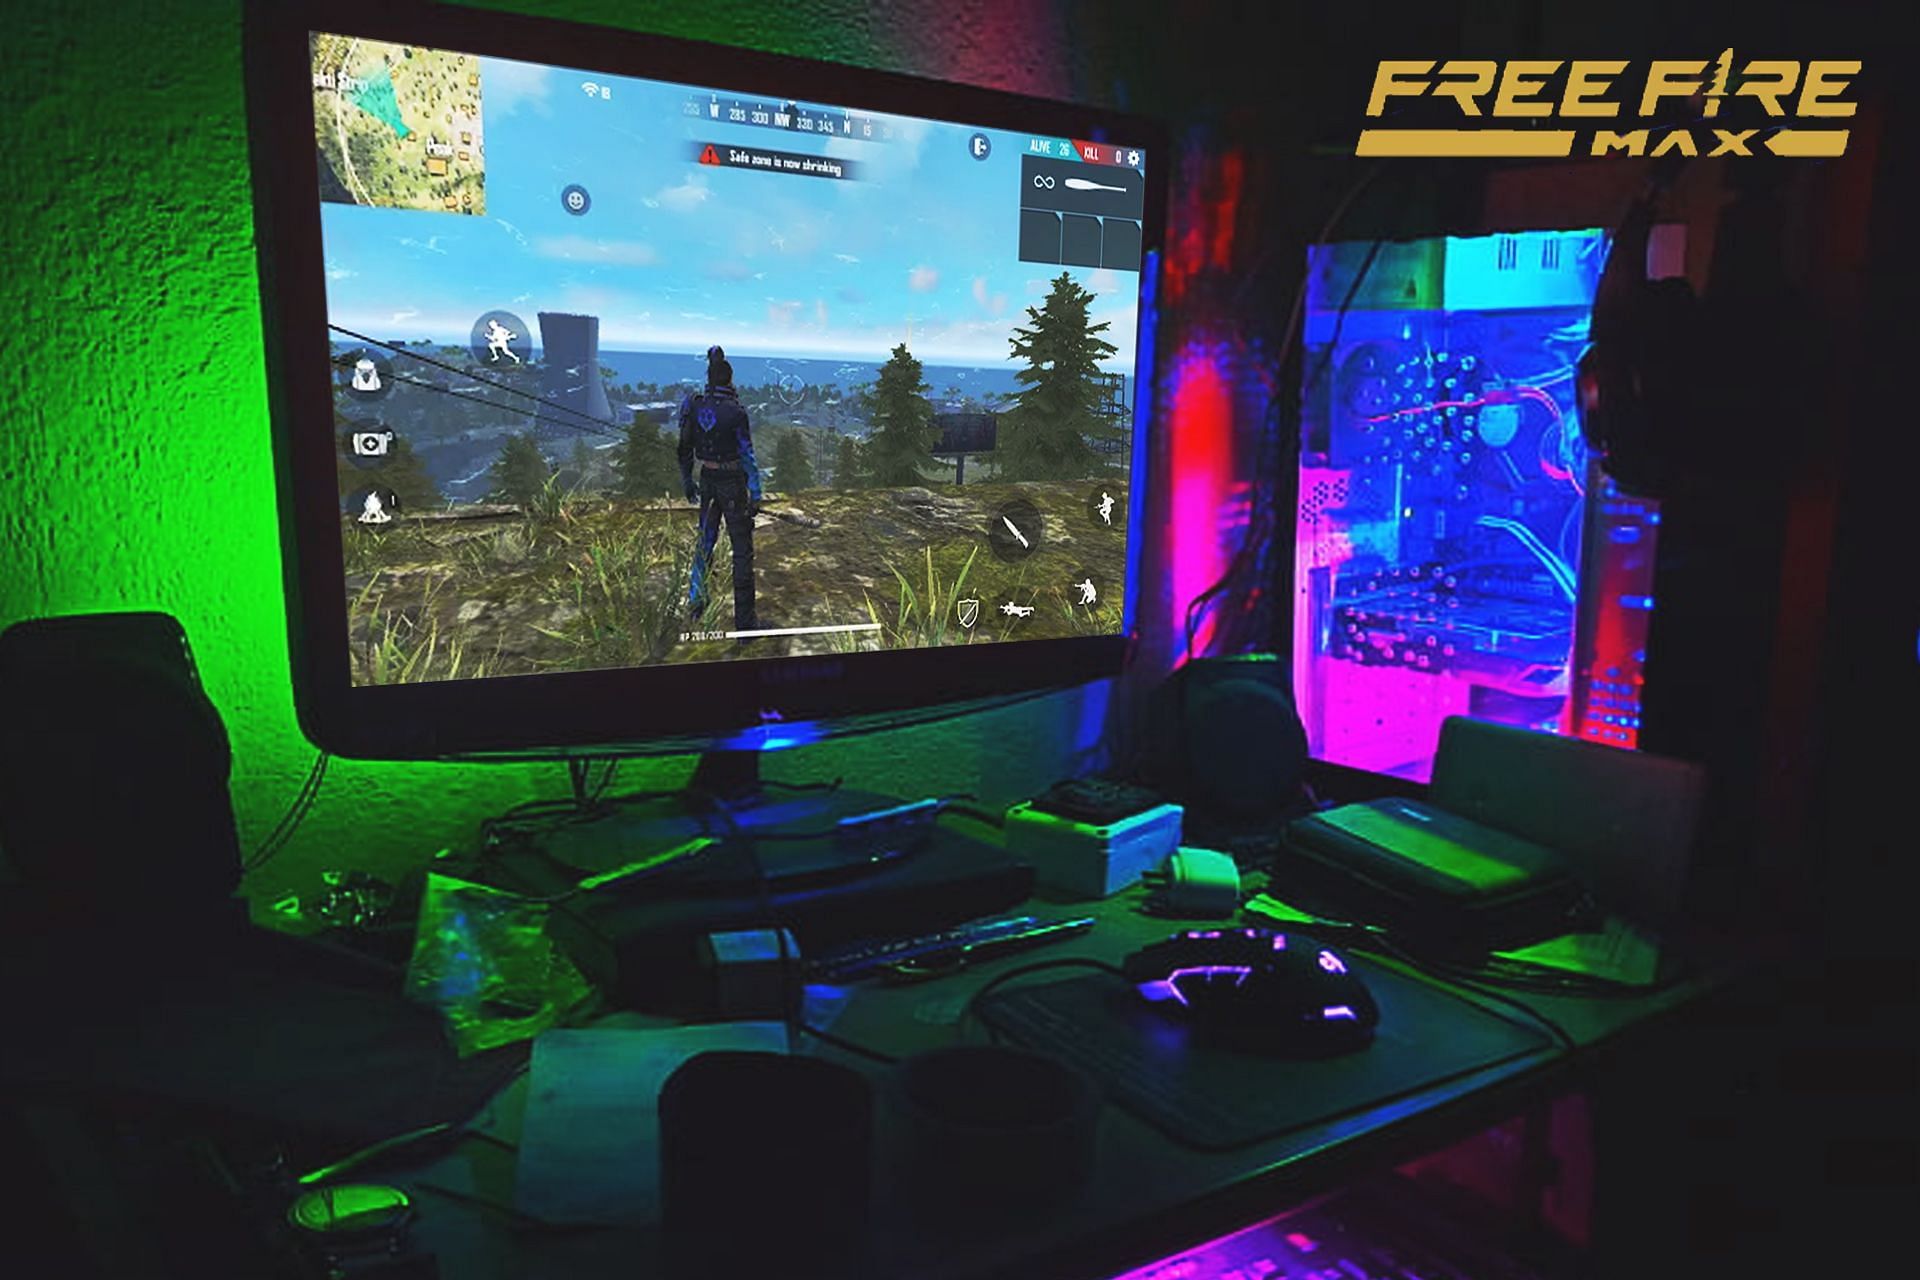 Free Fire Max PC - Download & play on Windows PC smooth with